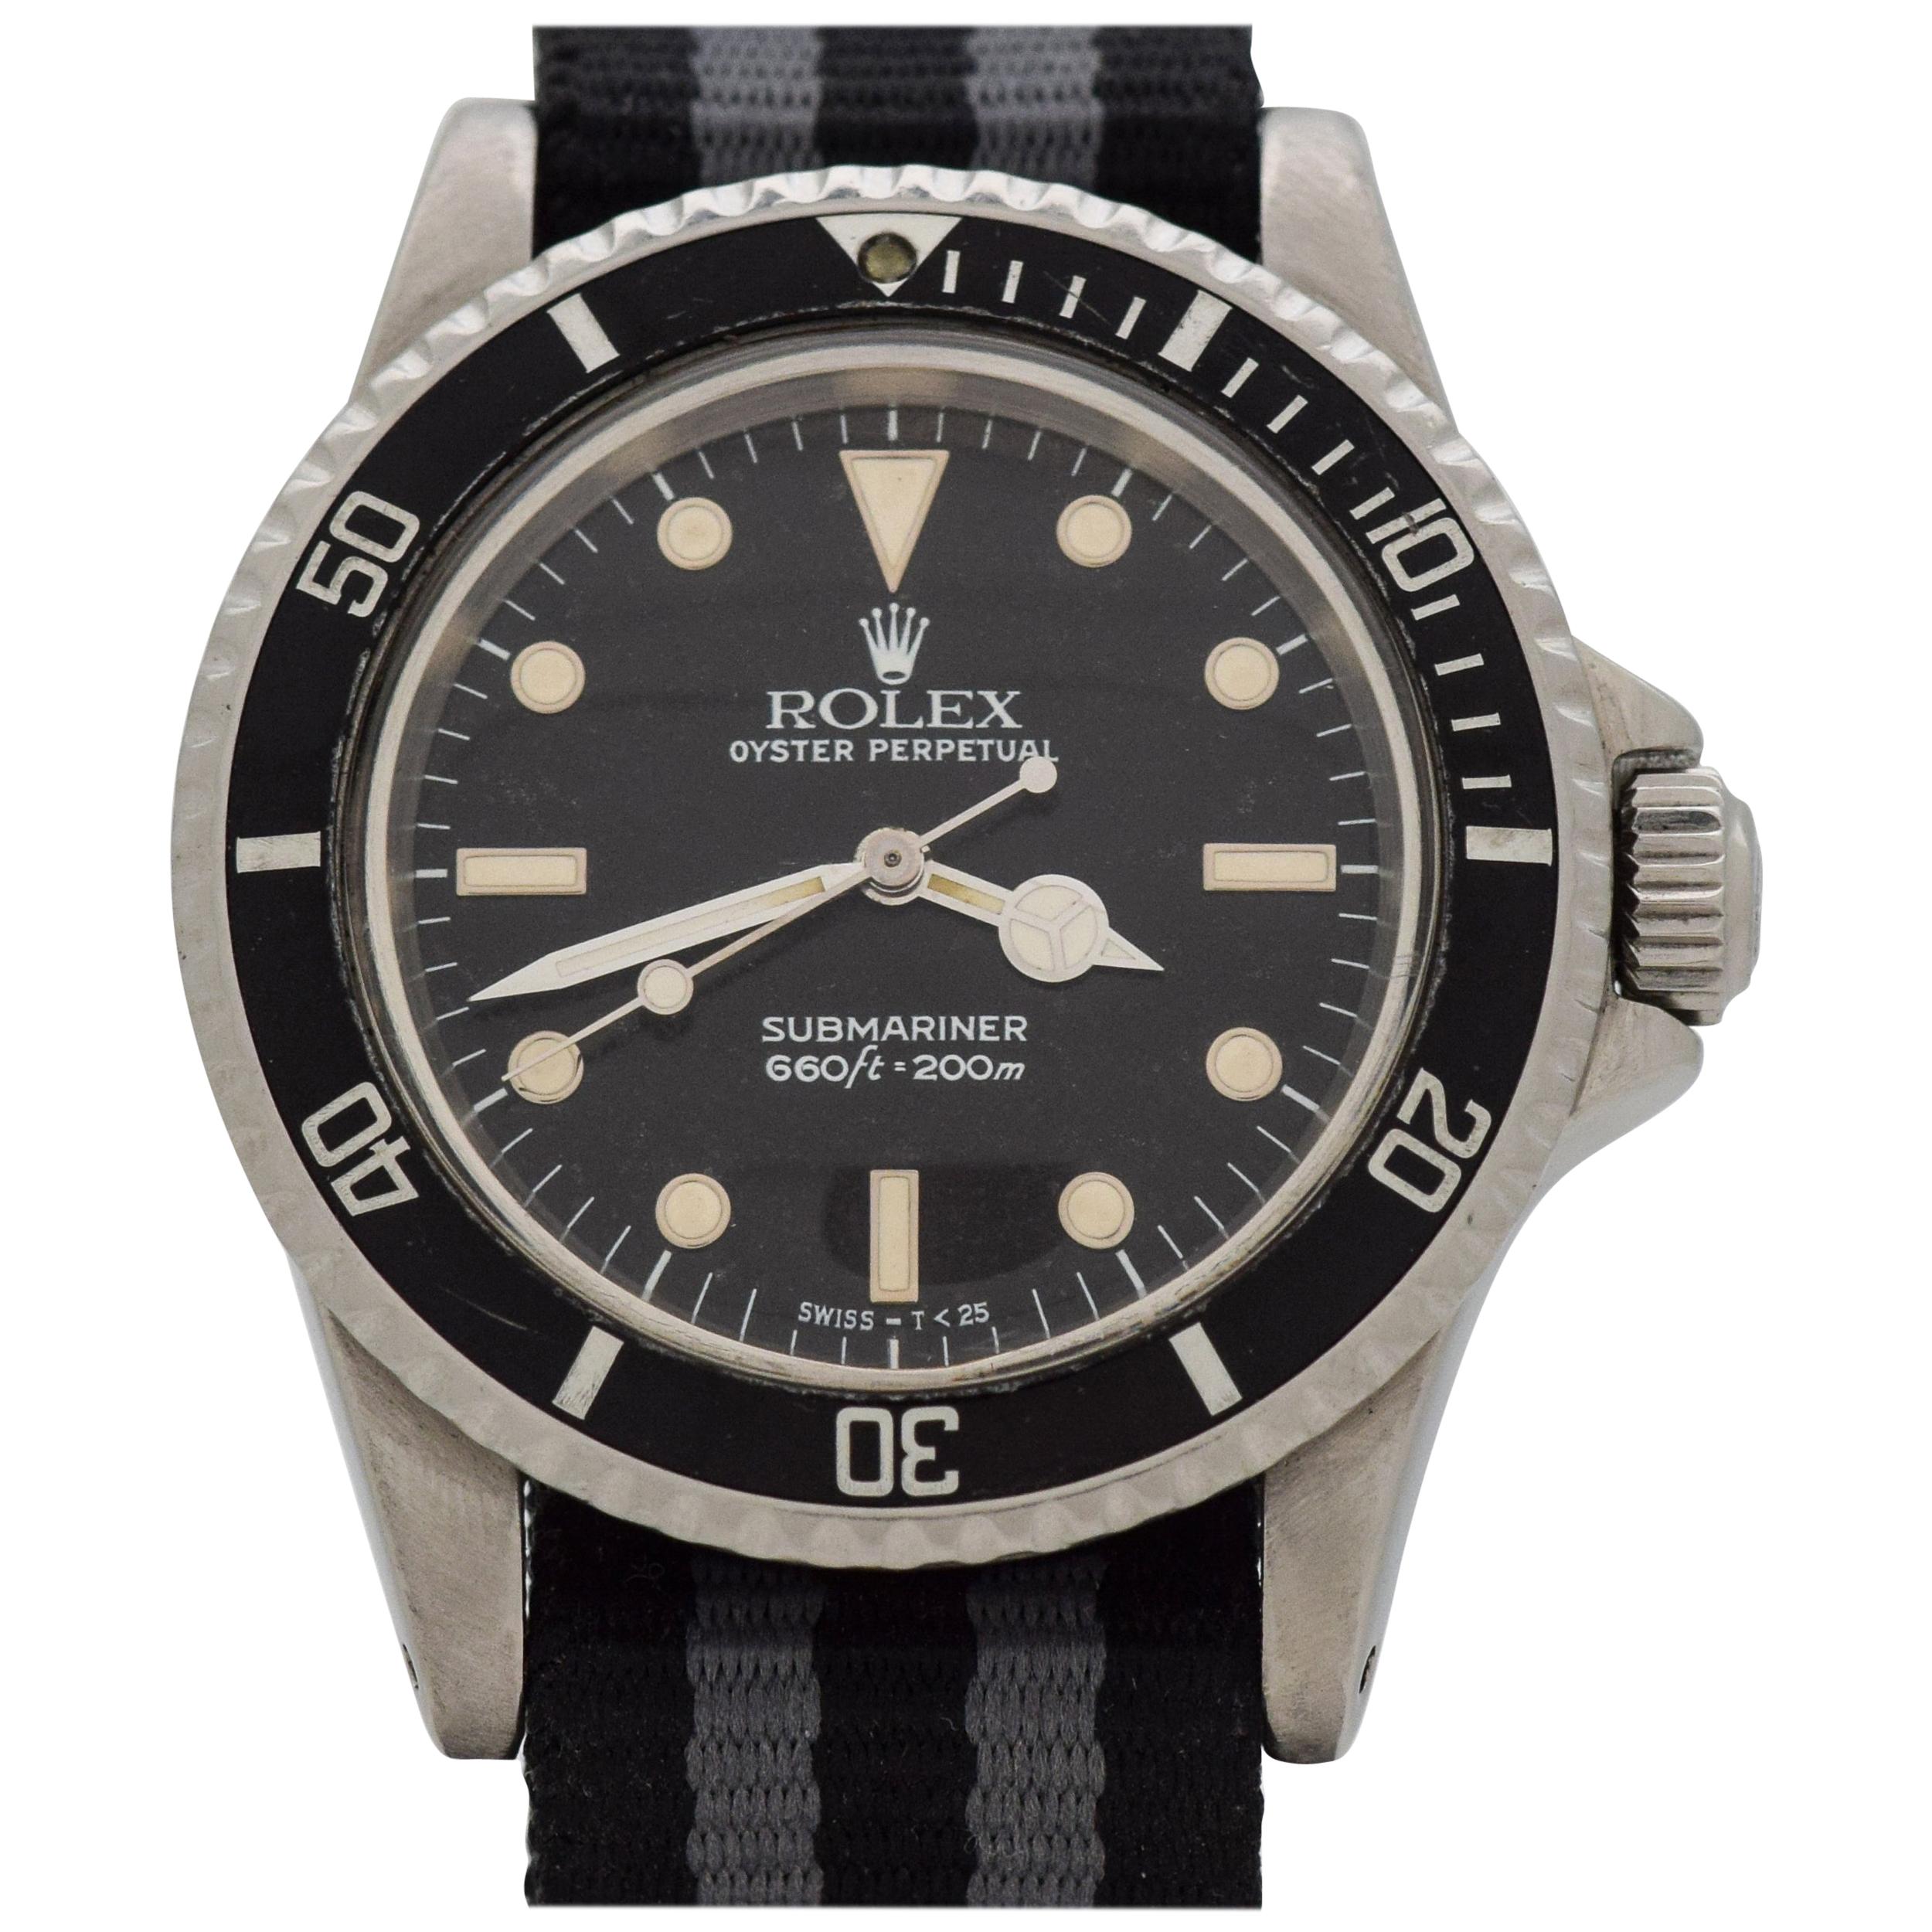 Vintage Rolex Submariner Reference 5513 Stainless Steel Watch, 1986 For Sale